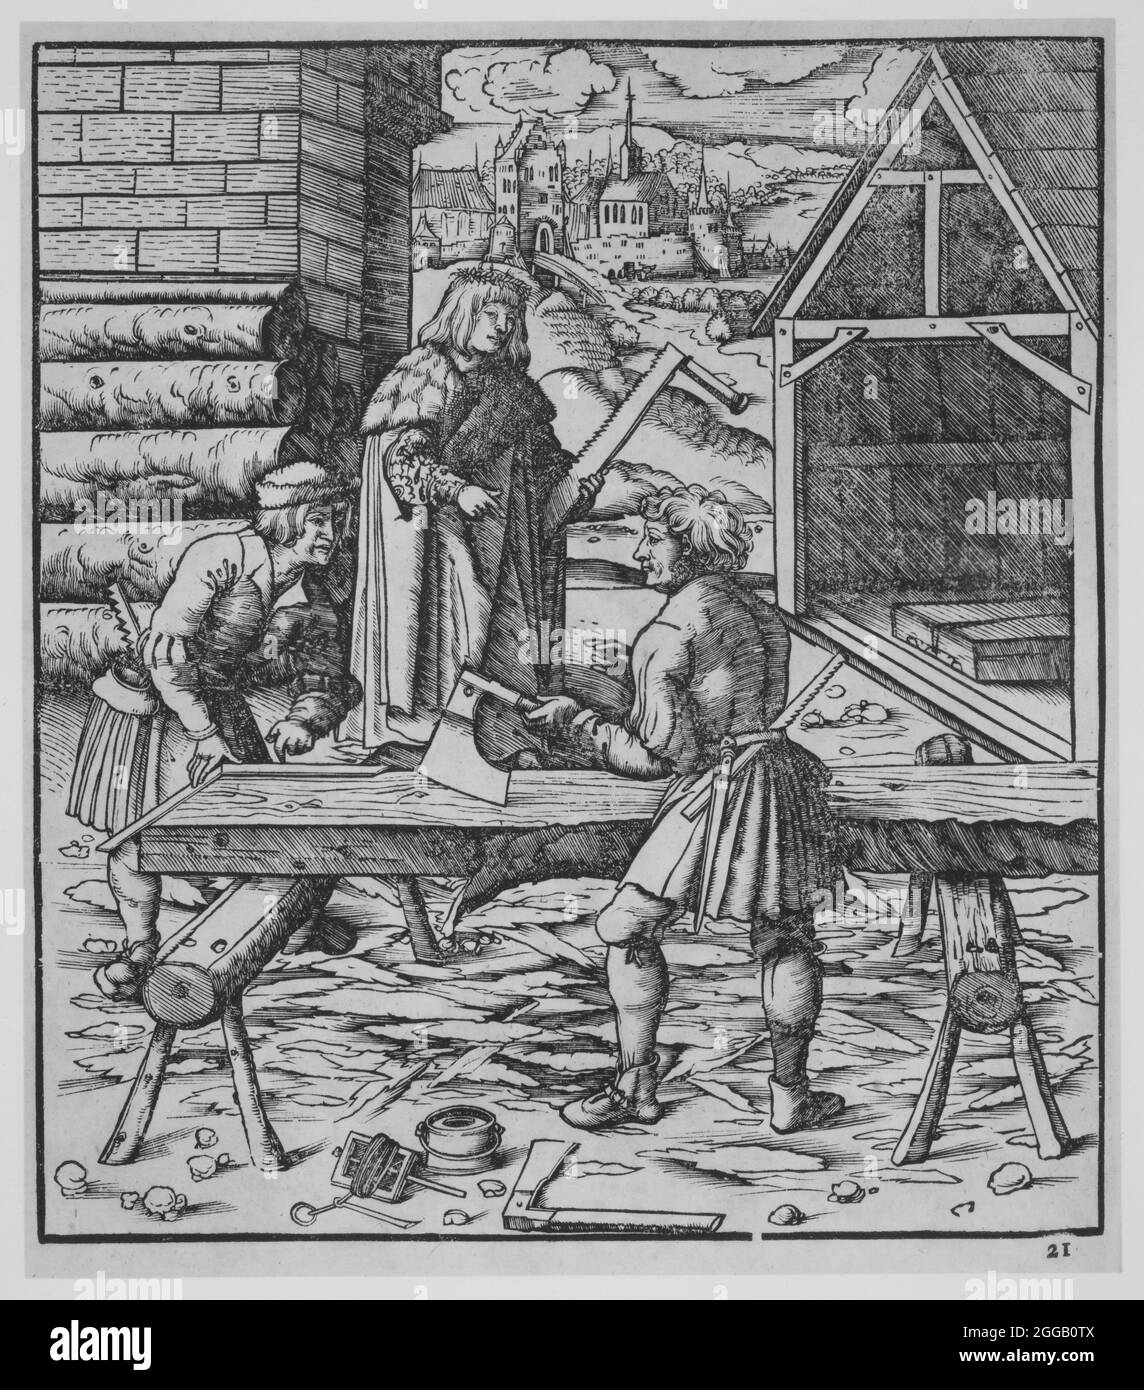 Carpenters, ca.1500. Scene from a 1775 edition of Der Weisskunig or The White King, a chivalric novel written between 1505 and 1516. Stock Photo